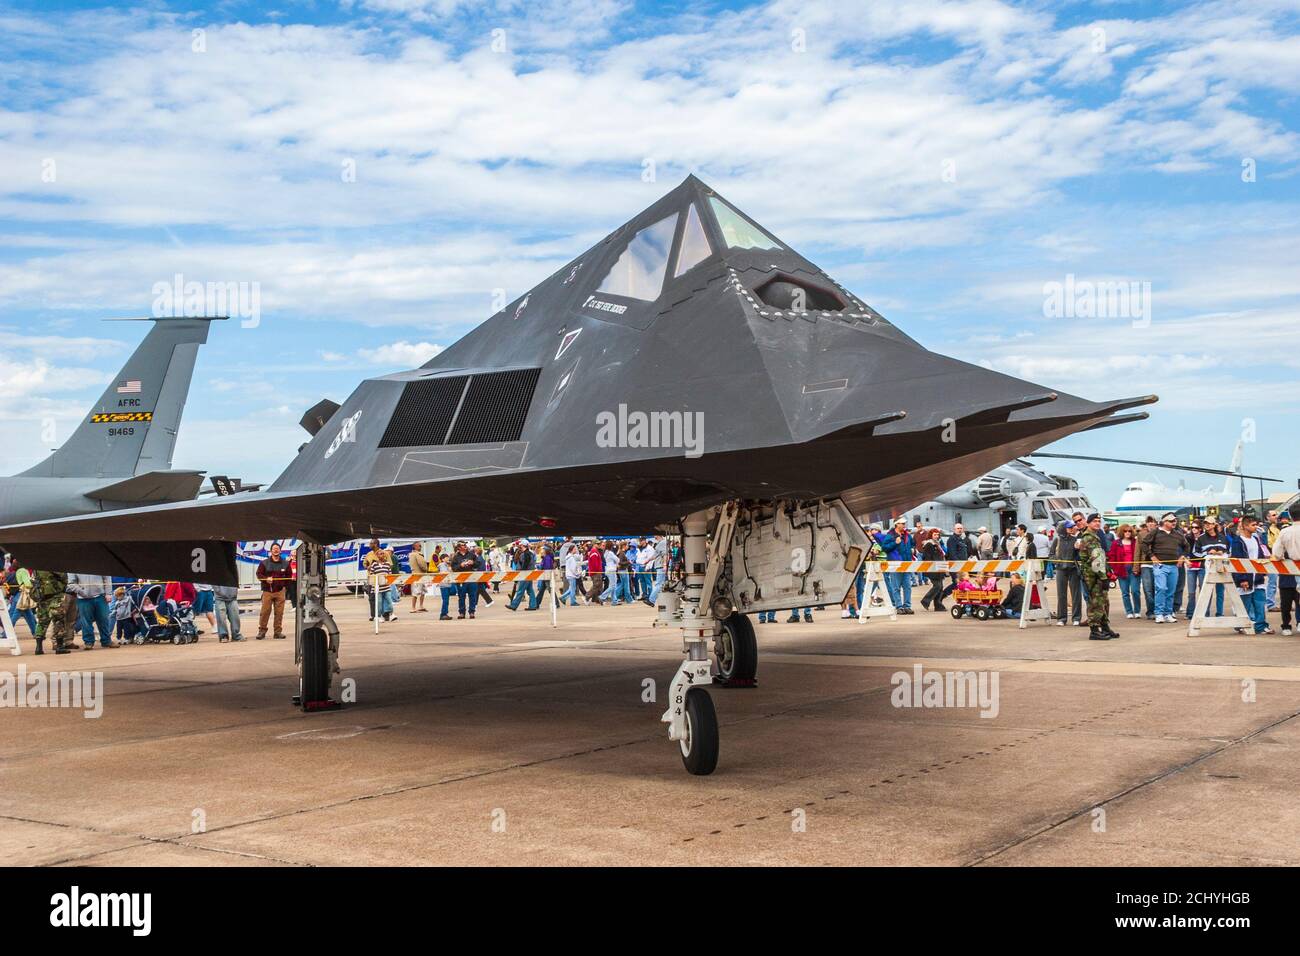 Lockheed F117 Nighthawk Stealth Aircraft at Wings Over Houston Air